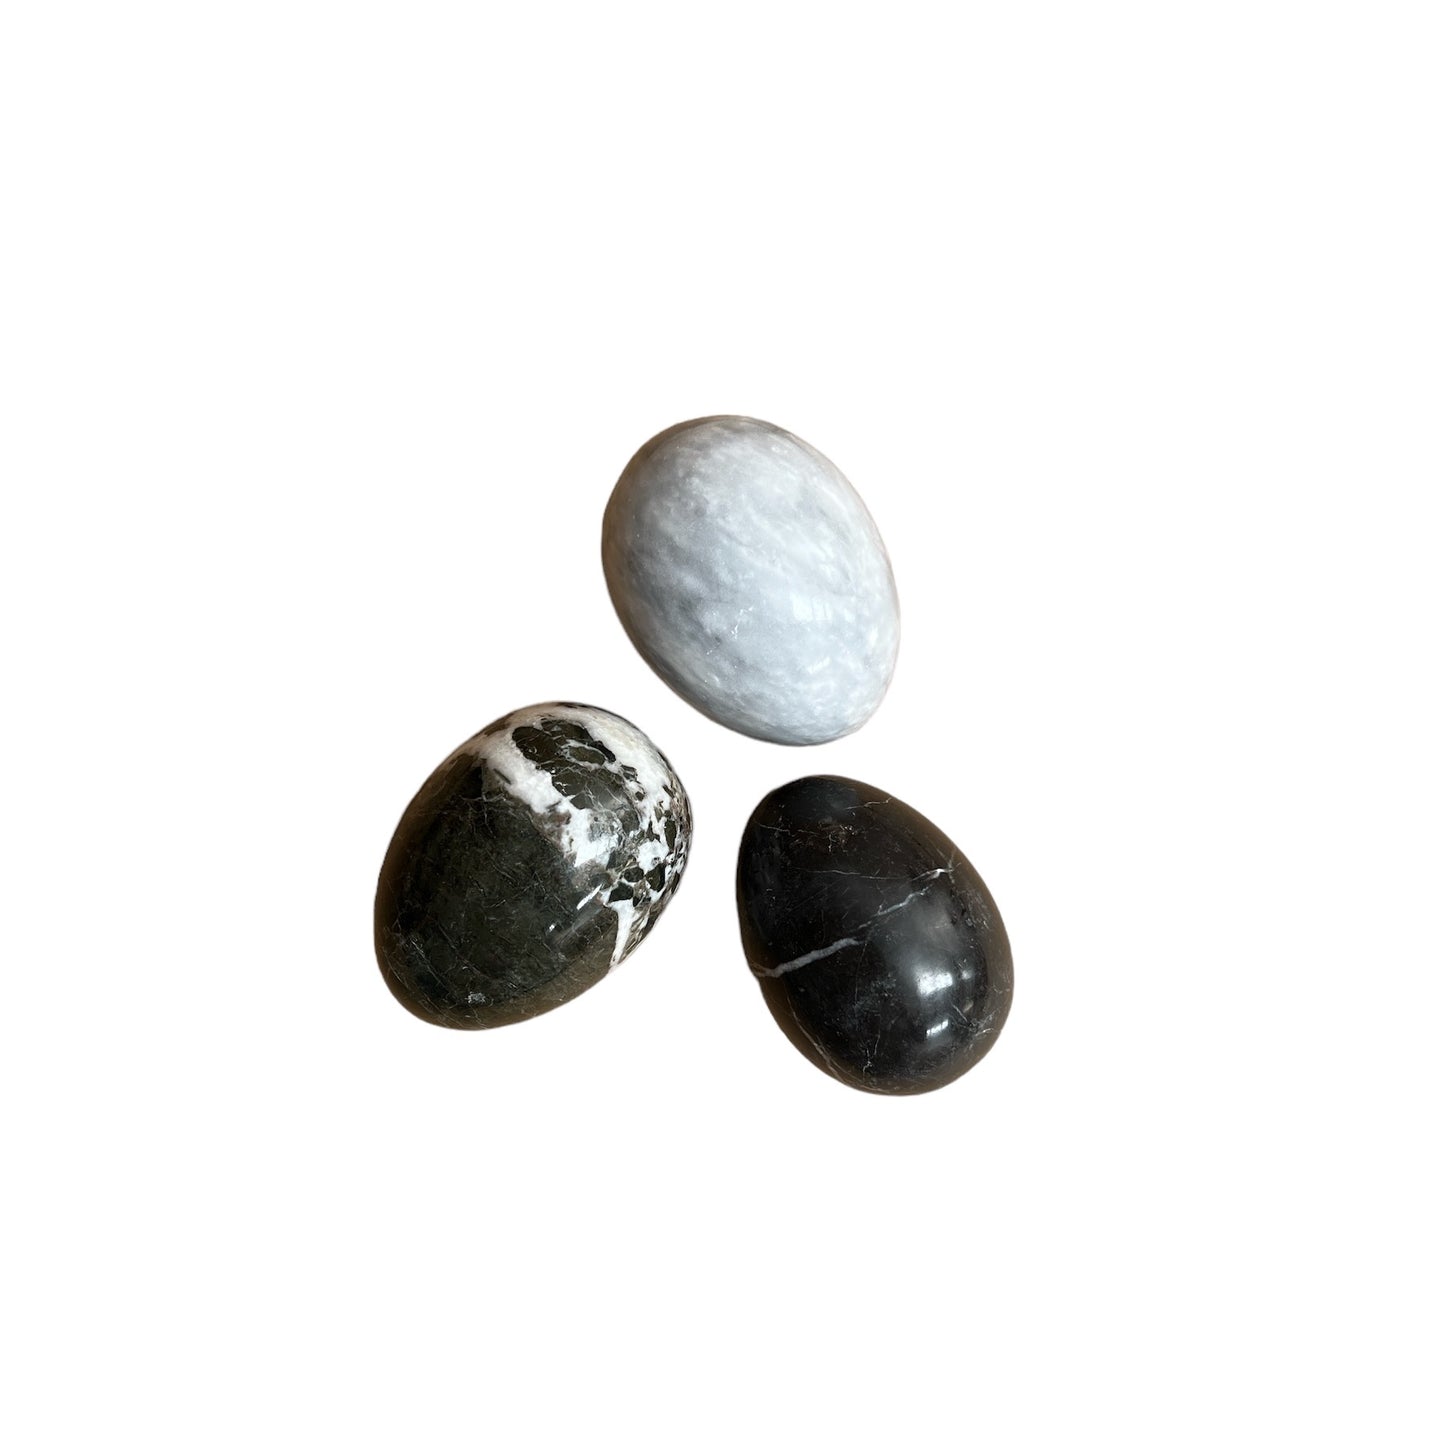 3" Mixed Marble Eggs - Case of 5